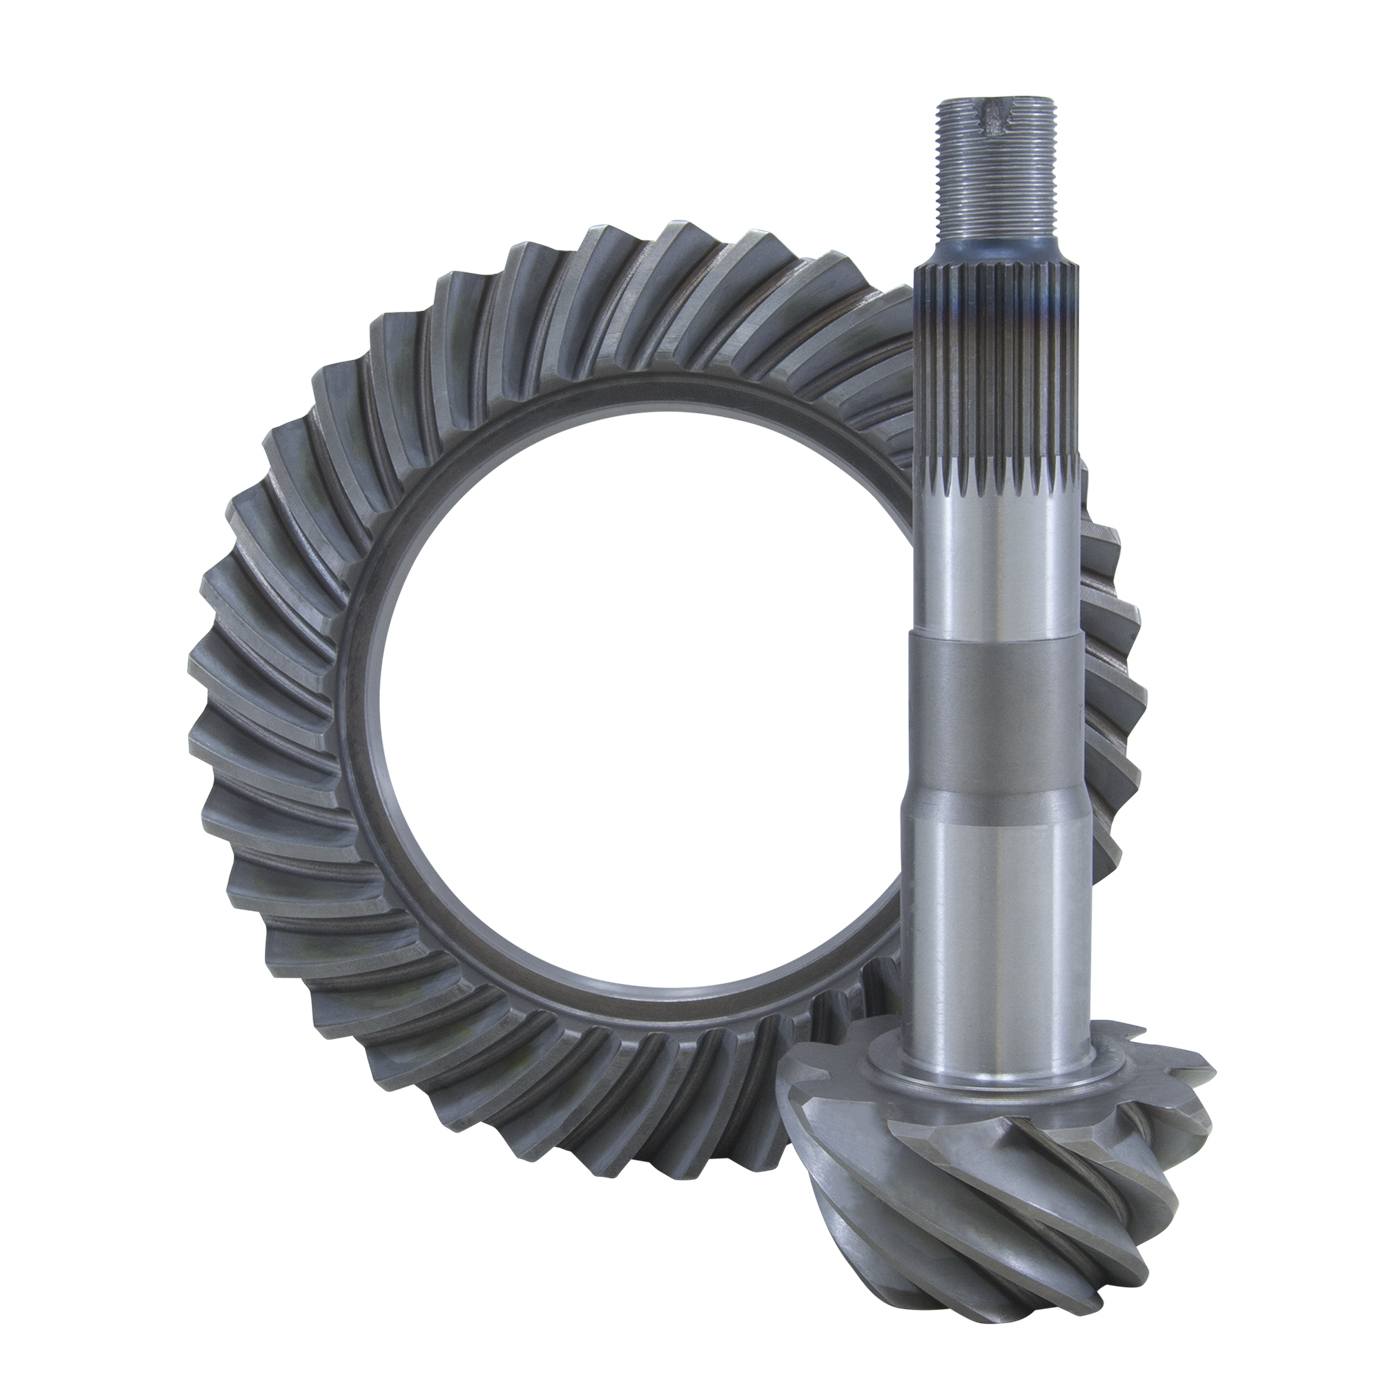 High performance Yukon Ring & Pinion gear set for Toyota V6 in a 4.30 ratio 